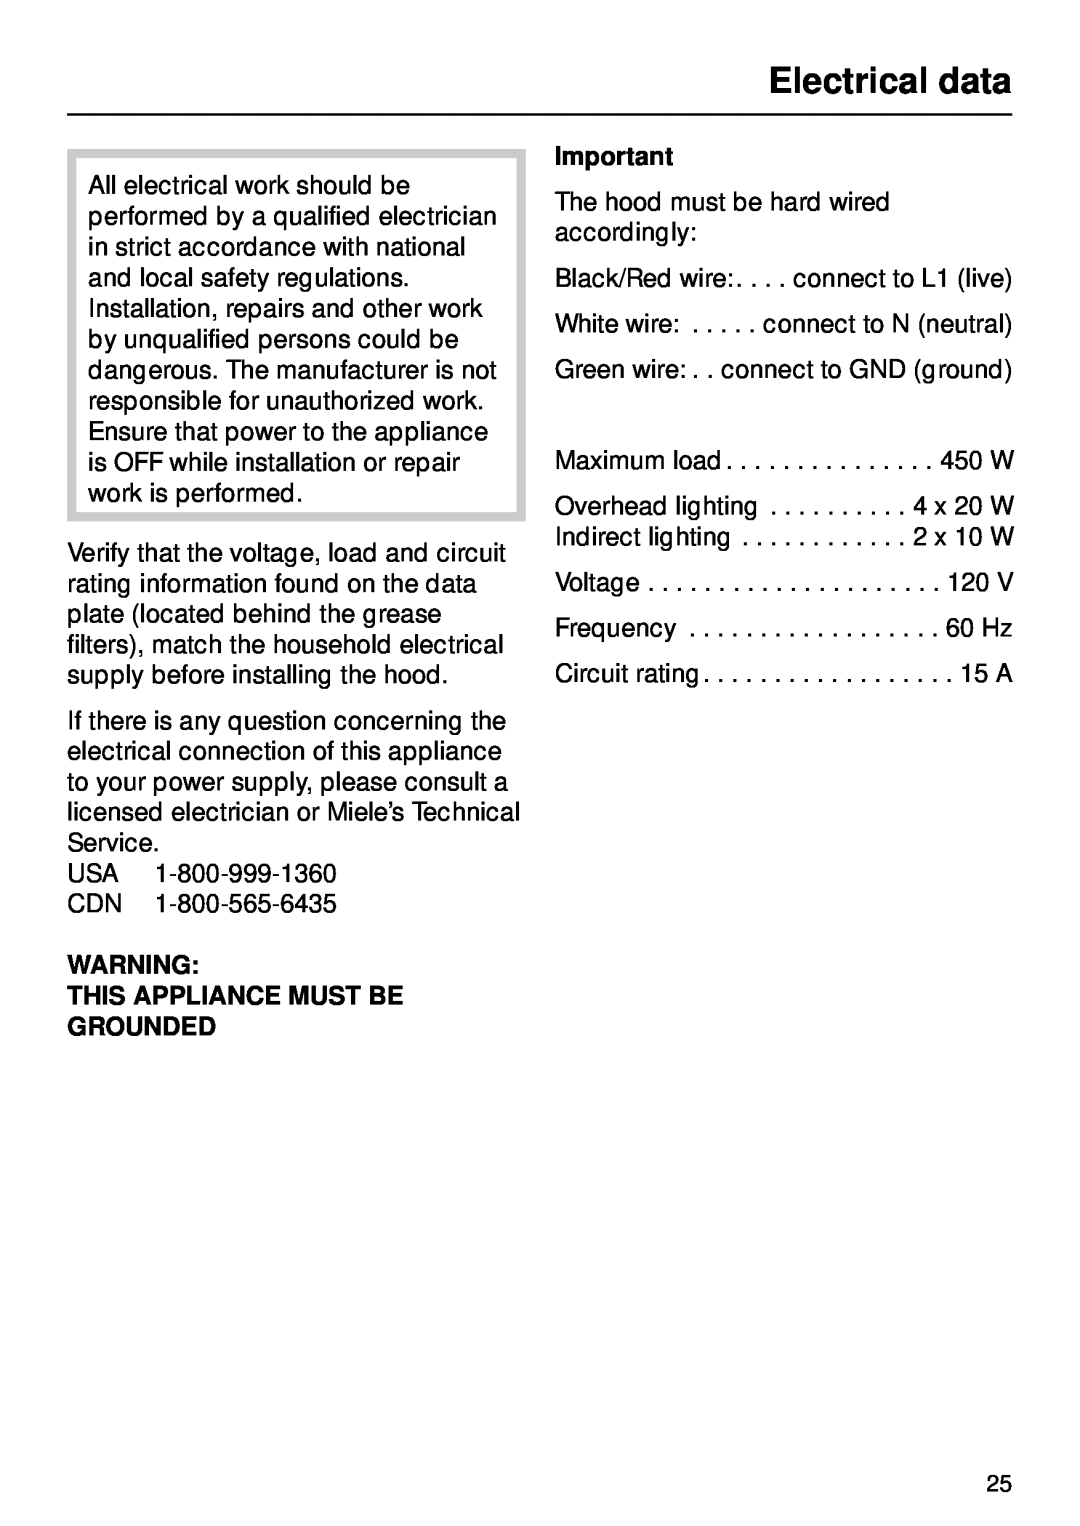 Miele DA270 installation instructions Electrical data, This Appliance Must Be Grounded 